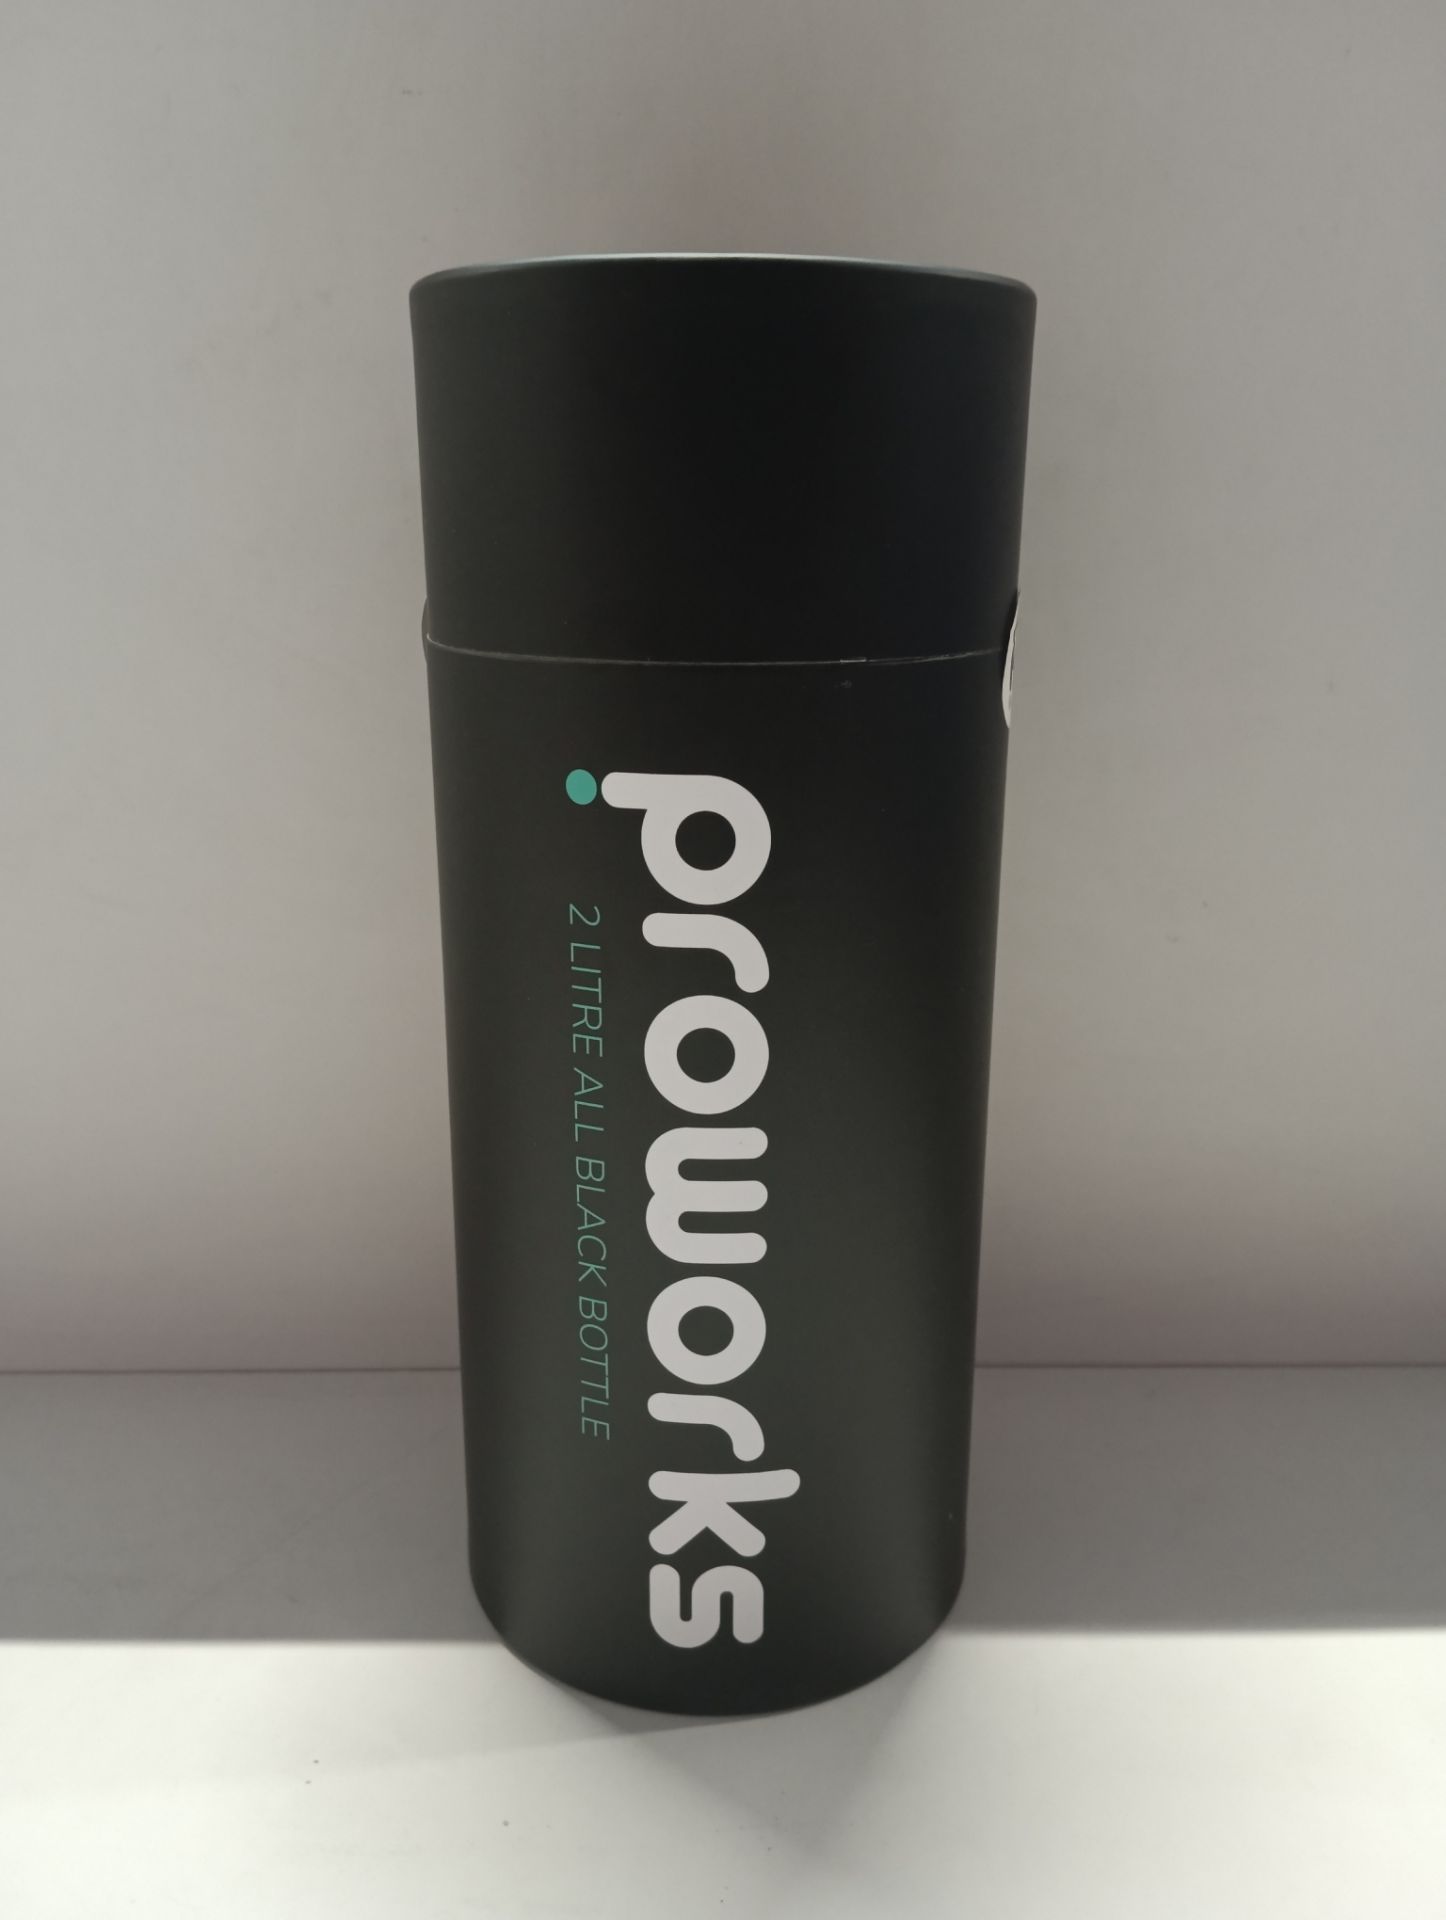 RRP £30.10 Proworks 2 Litre Water Bottle | Vacuum Insulated Stainless - Image 2 of 2